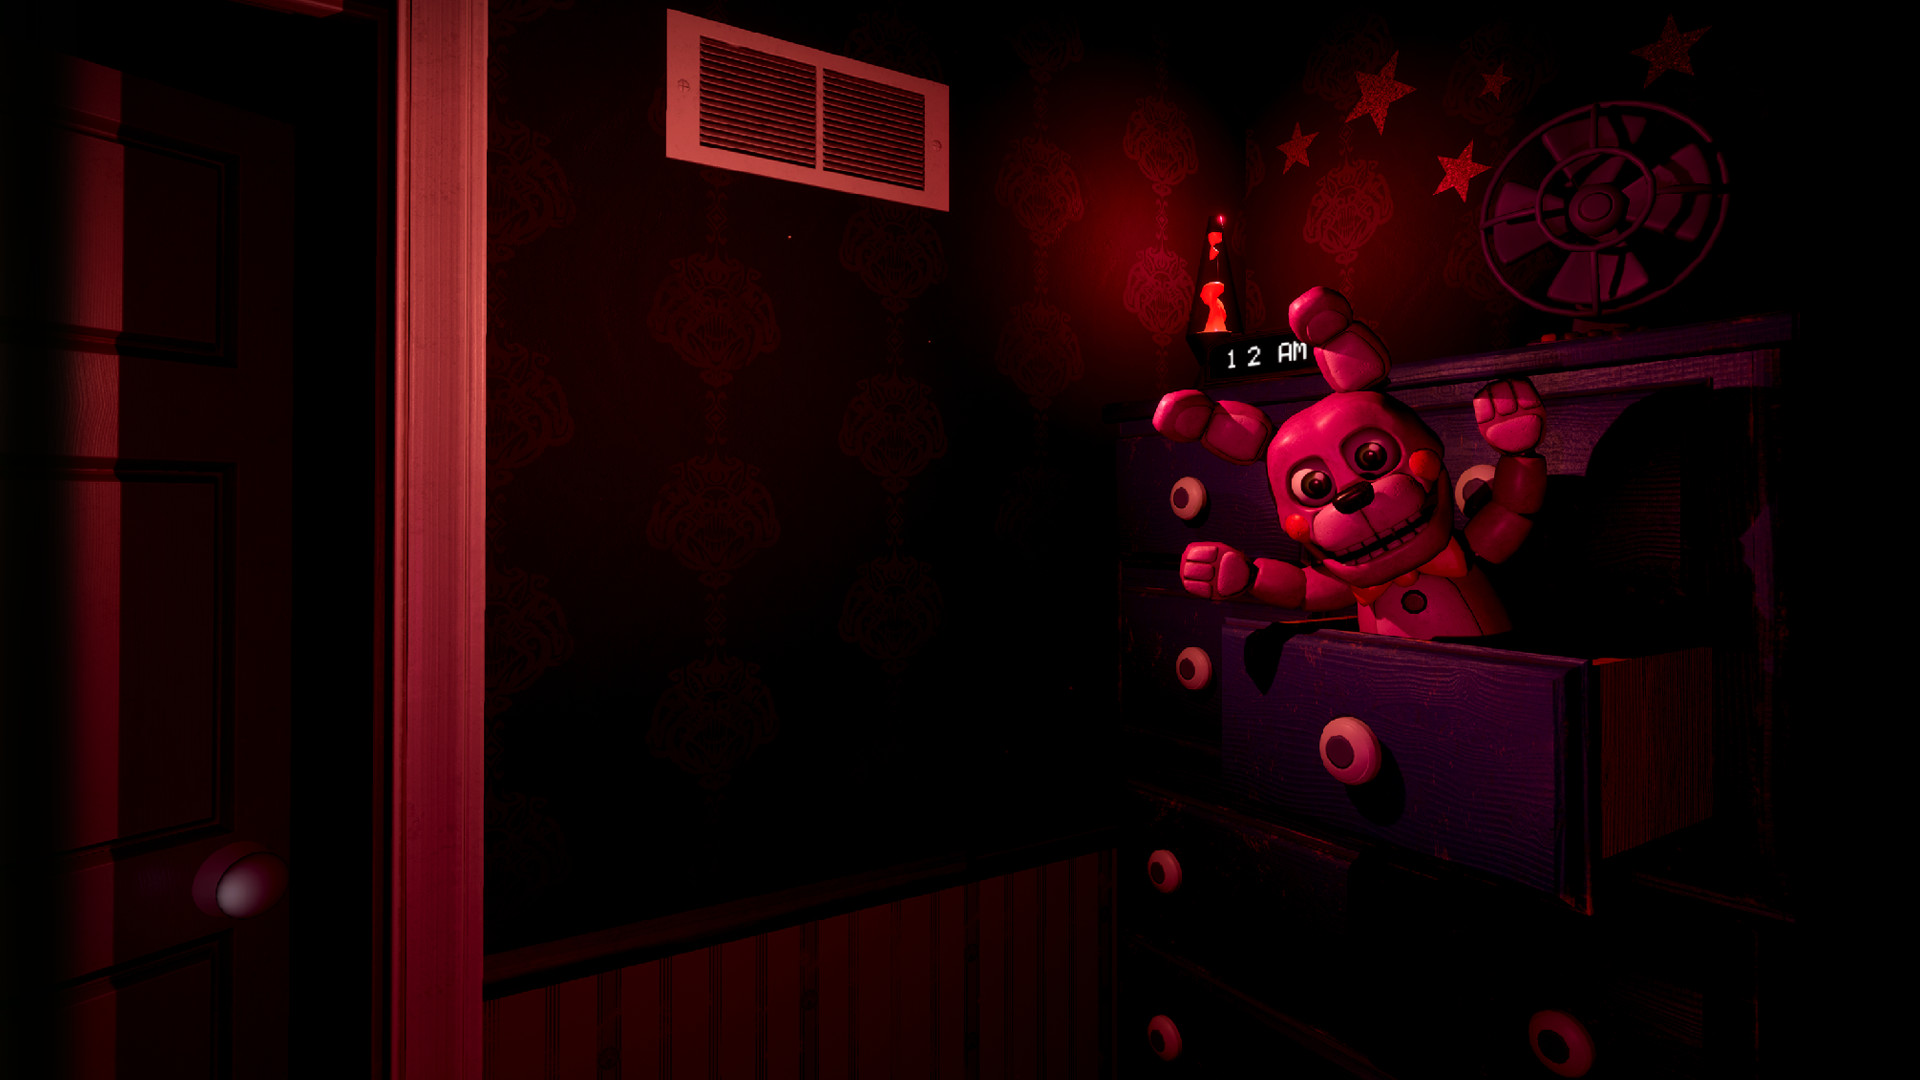 Five Nights At Freddy S Help Wanted On Steam